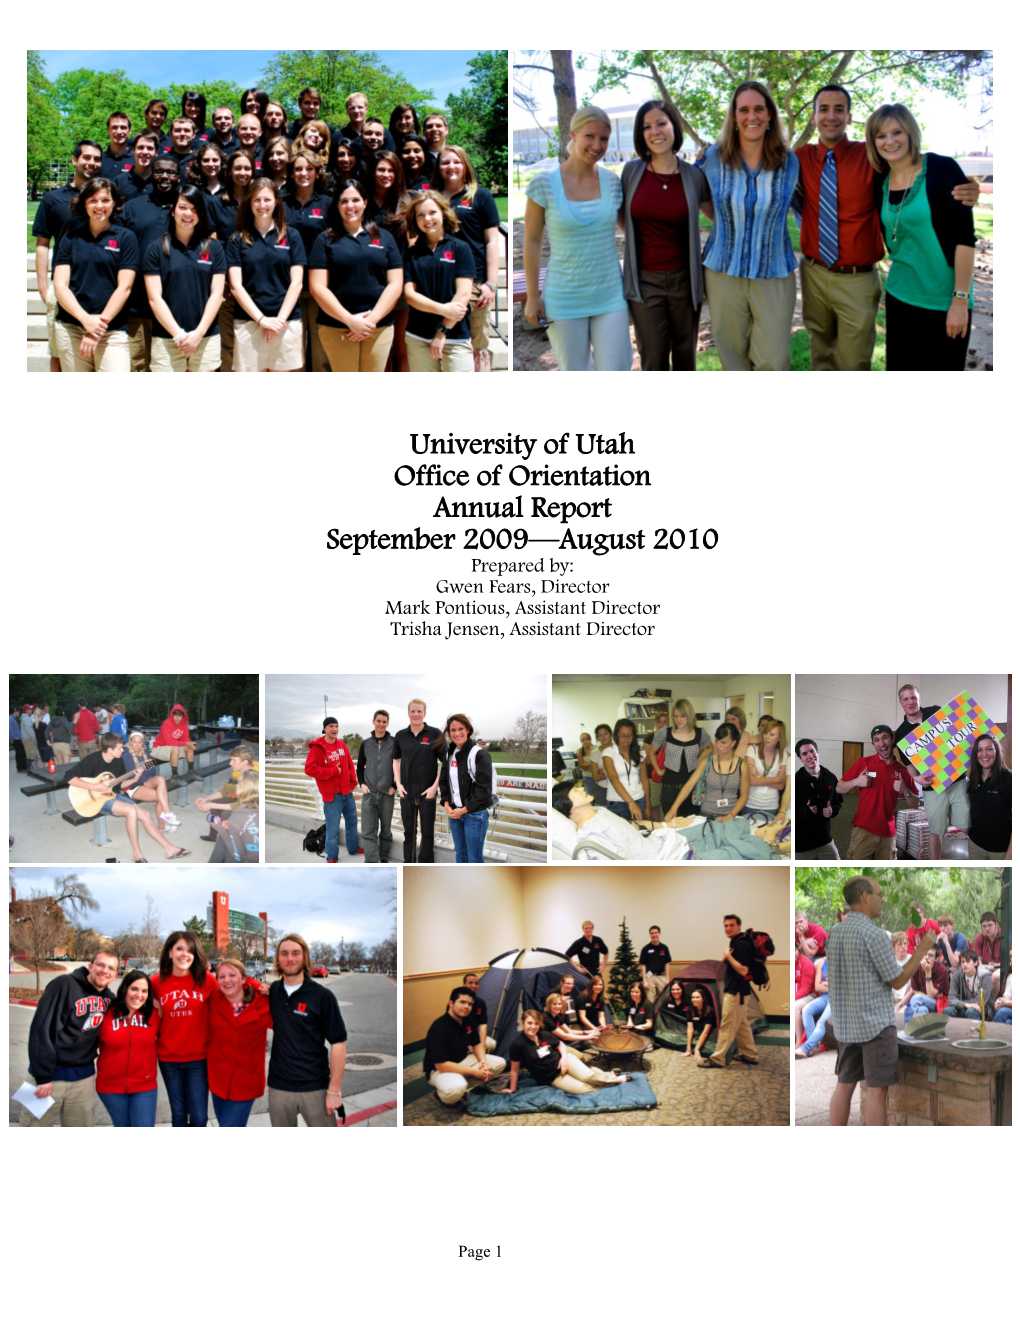 Orientation Annual Report September 2009—August 2010 Prepared By: Gwen Fears, Director Mark Pontious, Assistant Director Trisha Jensen, Assistant Director